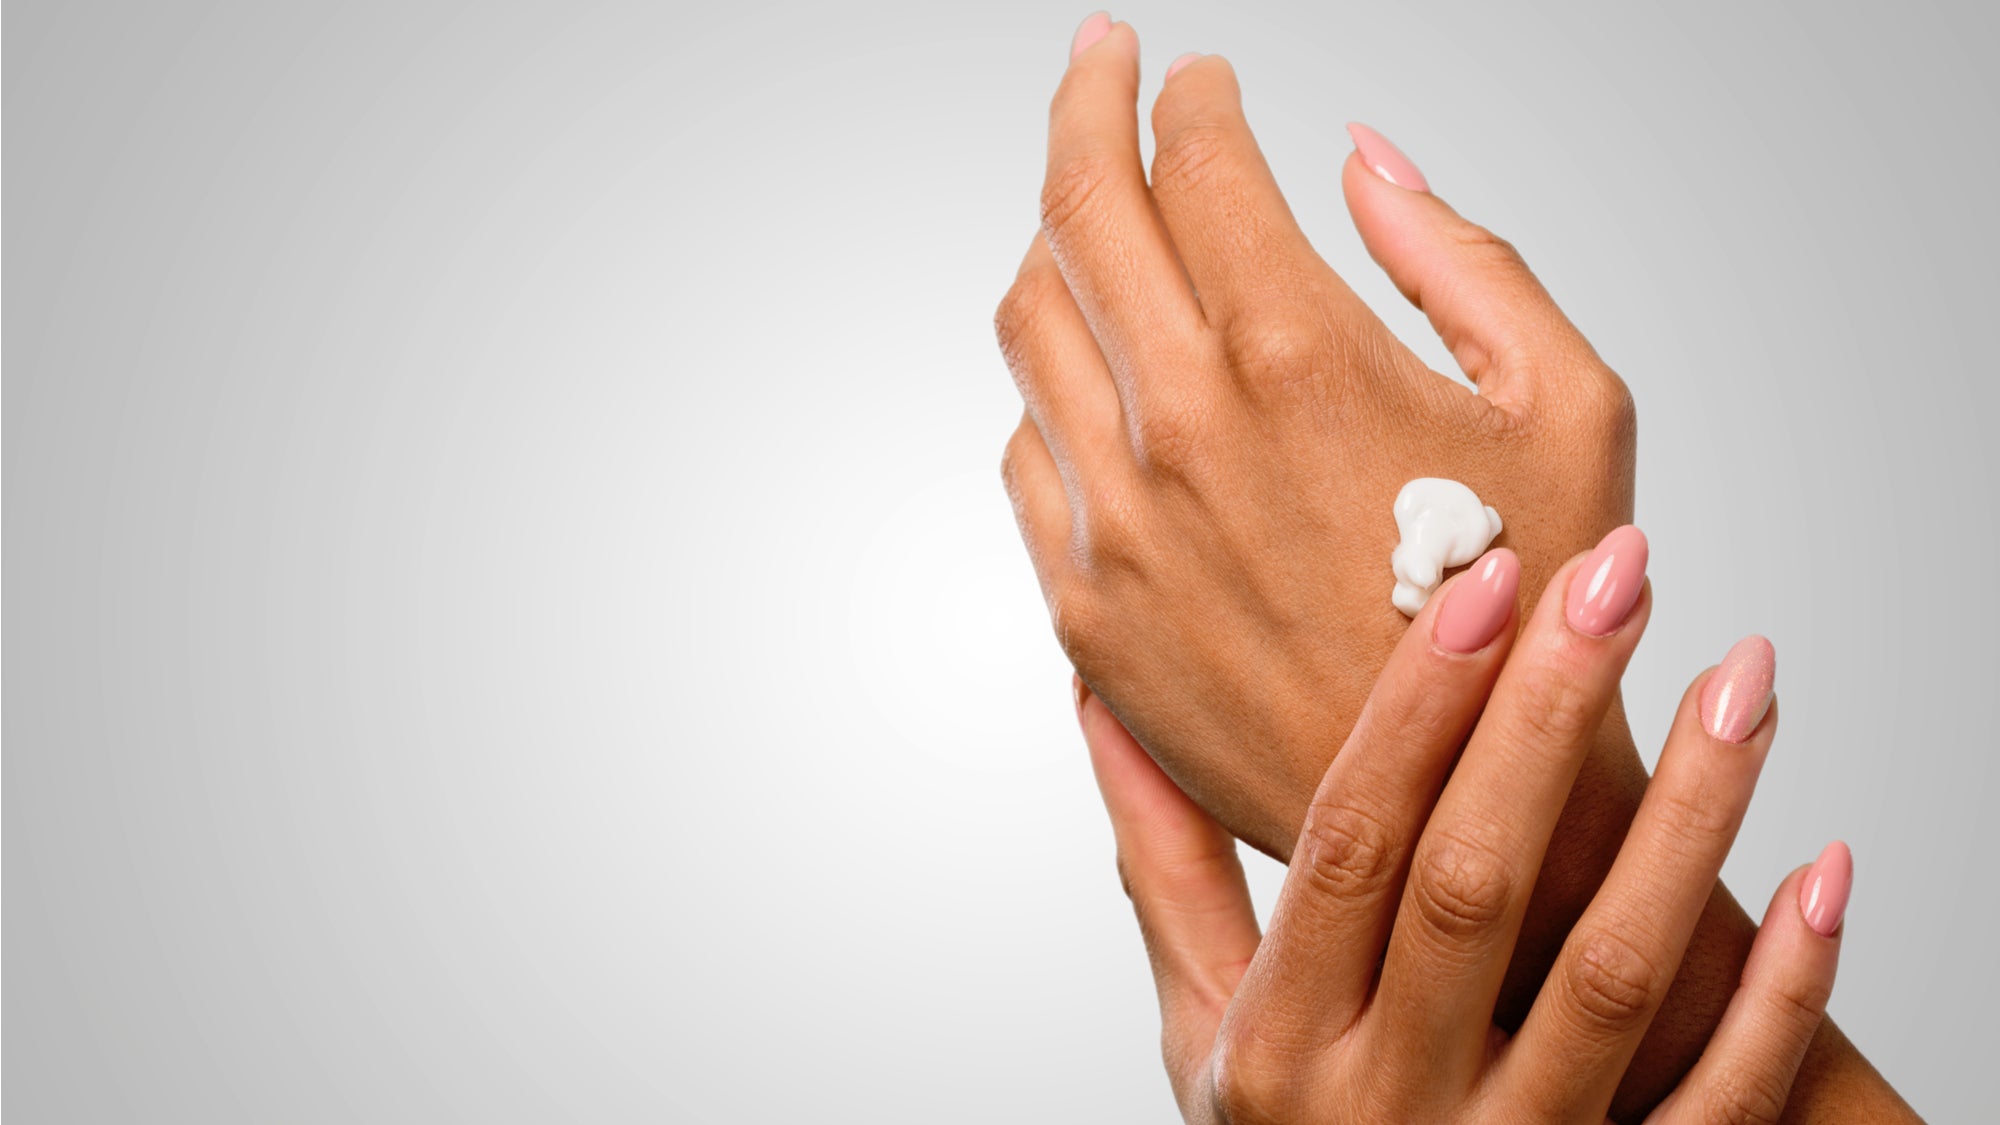 What’s The Best Lotion For Over-Washed Hands?